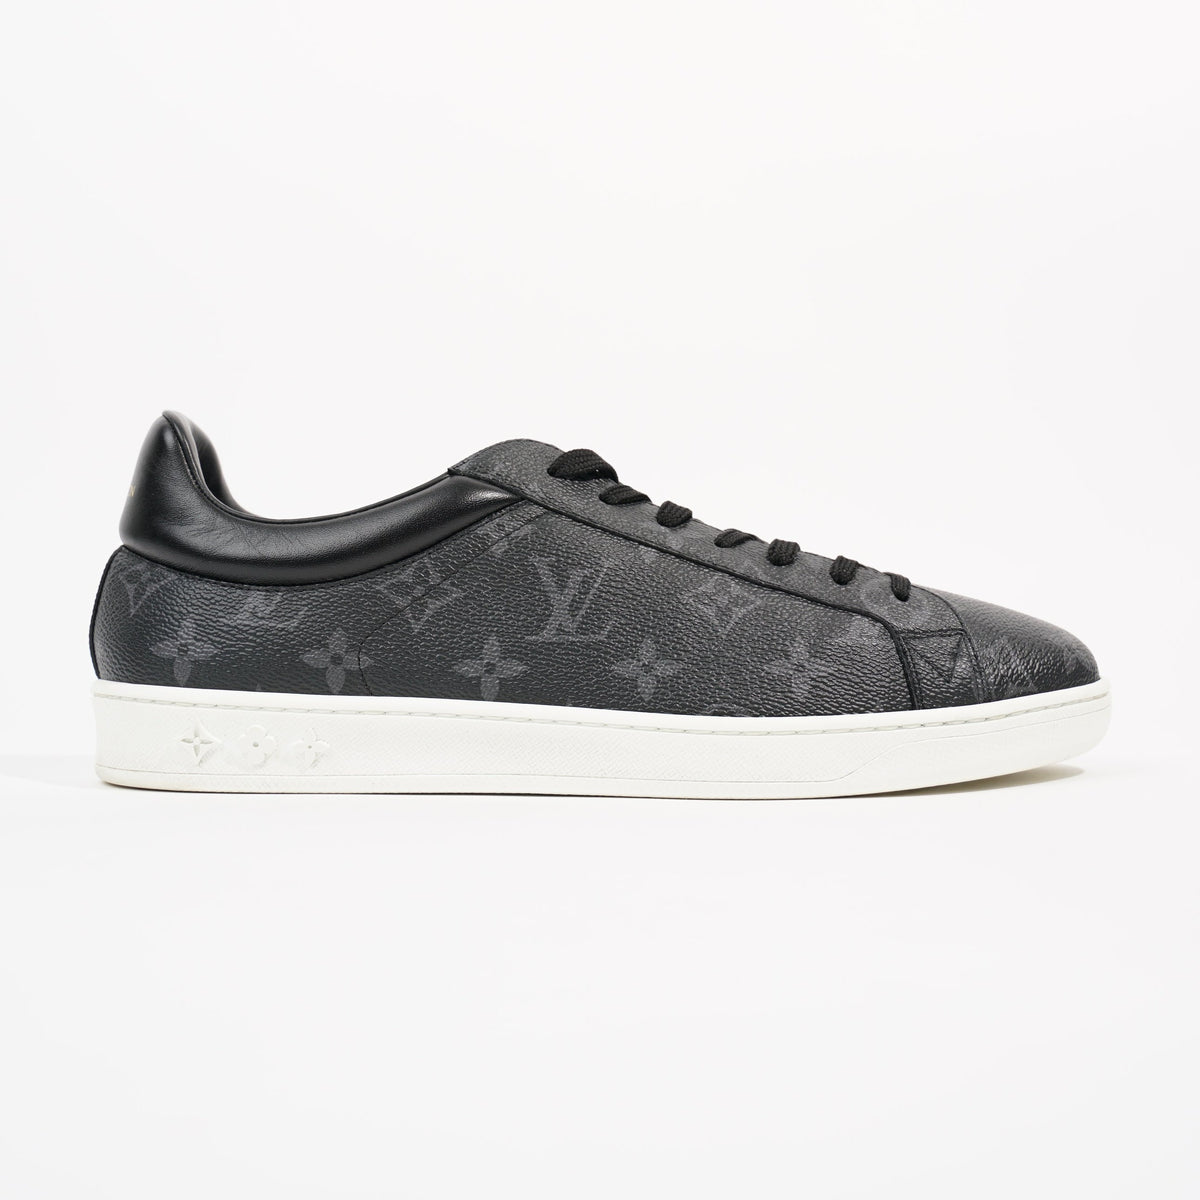 LV Trainer Sneakers (US 8) (LV 6) - Virgil Abloh Off White Canary